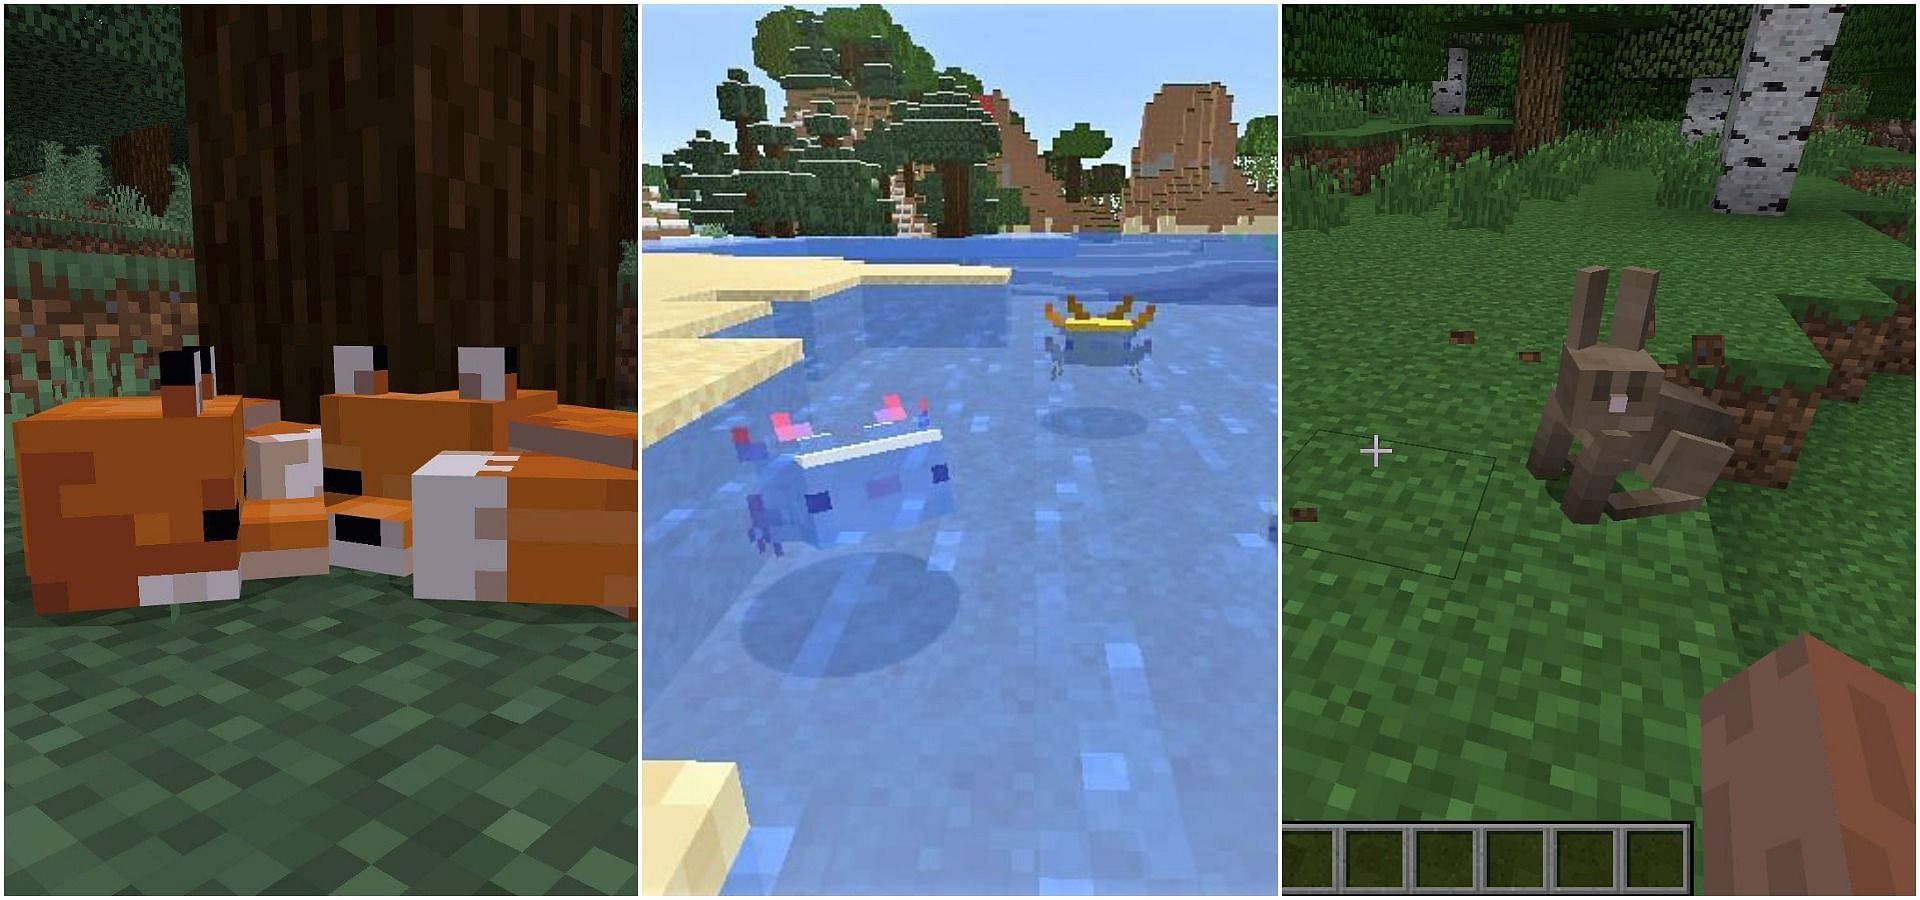 Minecraft mobs which cannot be tamed (Image via Minecraft)